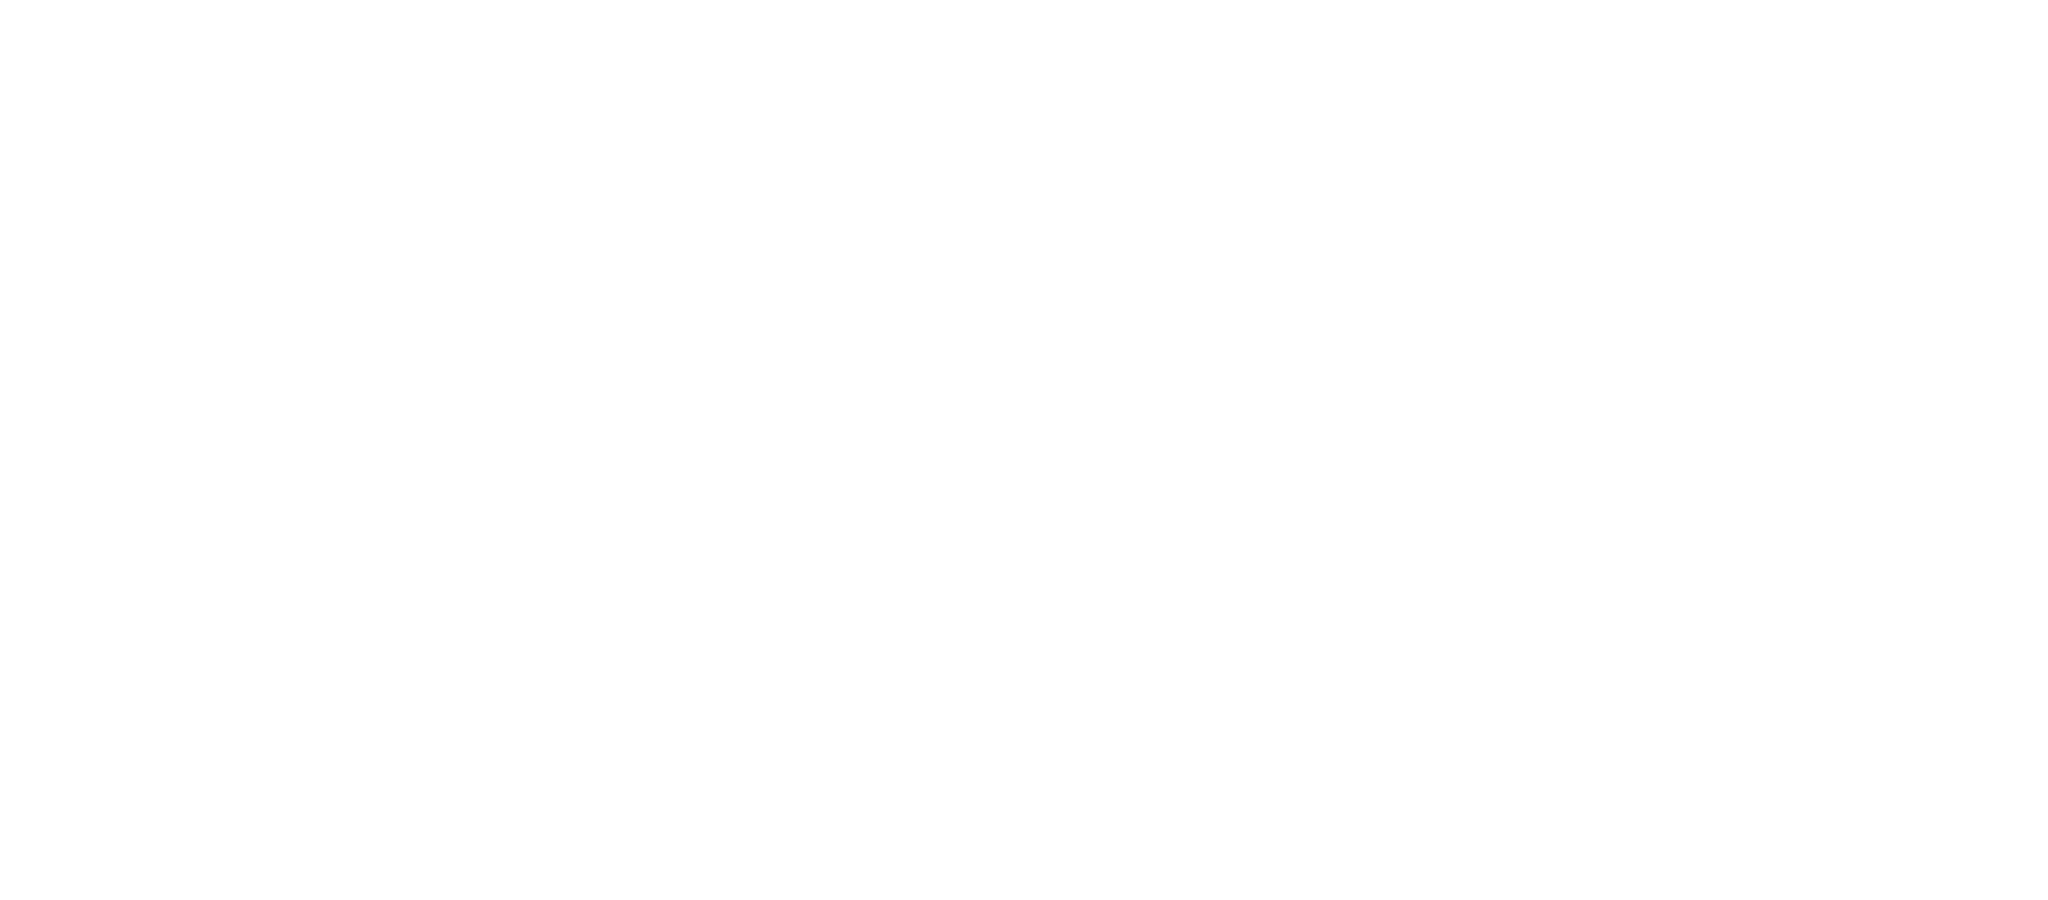 Adventures by Disney with Wishful Thinking